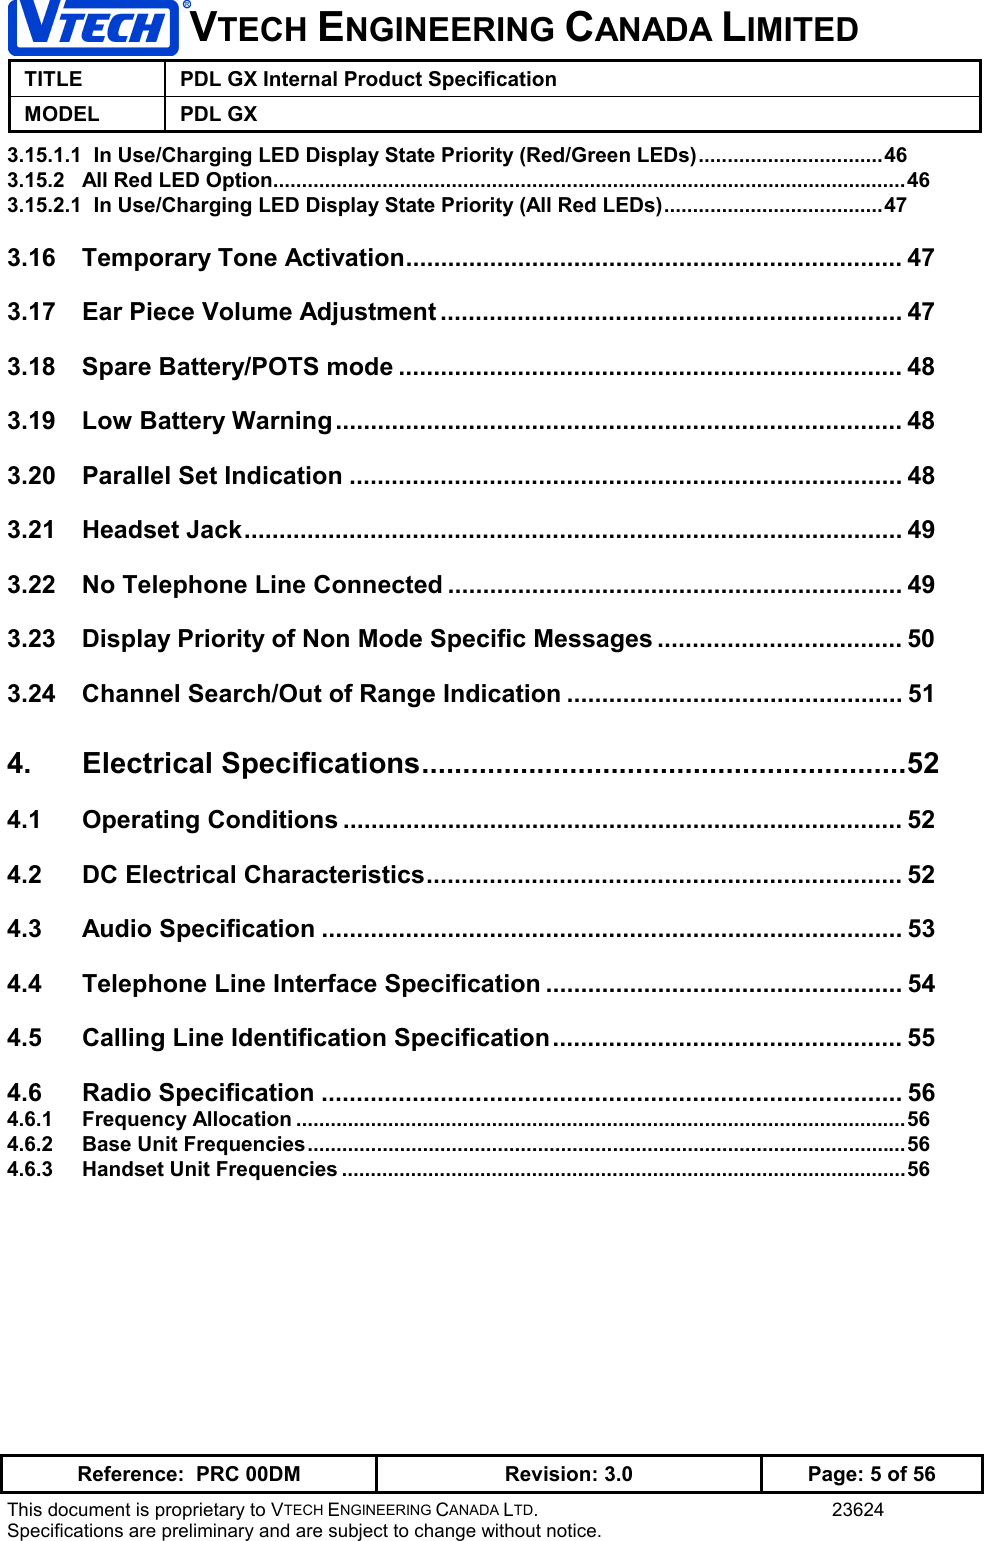 VTECH ENGINEERING CANADA LIMITEDTITLE PDL GX Internal Product SpecificationMODEL PDL GXReference:  PRC 00DM Revision: 3.0 Page: 5 of 56This document is proprietary to VTECH ENGINEERING CANADA LTD. 23624Specifications are preliminary and are subject to change without notice.3.15.1.1  In Use/Charging LED Display State Priority (Red/Green LEDs)................................463.15.2 All Red LED Option..............................................................................................................463.15.2.1  In Use/Charging LED Display State Priority (All Red LEDs)......................................473.16 Temporary Tone Activation....................................................................... 473.17 Ear Piece Volume Adjustment .................................................................. 473.18 Spare Battery/POTS mode ........................................................................ 483.19 Low Battery Warning................................................................................. 483.20 Parallel Set Indication ............................................................................... 483.21 Headset Jack.............................................................................................. 493.22 No Telephone Line Connected ................................................................. 493.23 Display Priority of Non Mode Specific Messages ................................... 503.24 Channel Search/Out of Range Indication ................................................ 514. Electrical Specifications...........................................................524.1 Operating Conditions ................................................................................ 524.2 DC Electrical Characteristics.................................................................... 524.3 Audio Specification ................................................................................... 534.4 Telephone Line Interface Specification ................................................... 544.5 Calling Line Identification Specification.................................................. 554.6 Radio Specification ................................................................................... 564.6.1 Frequency Allocation ..........................................................................................................564.6.2 Base Unit Frequencies........................................................................................................564.6.3 Handset Unit Frequencies ..................................................................................................56